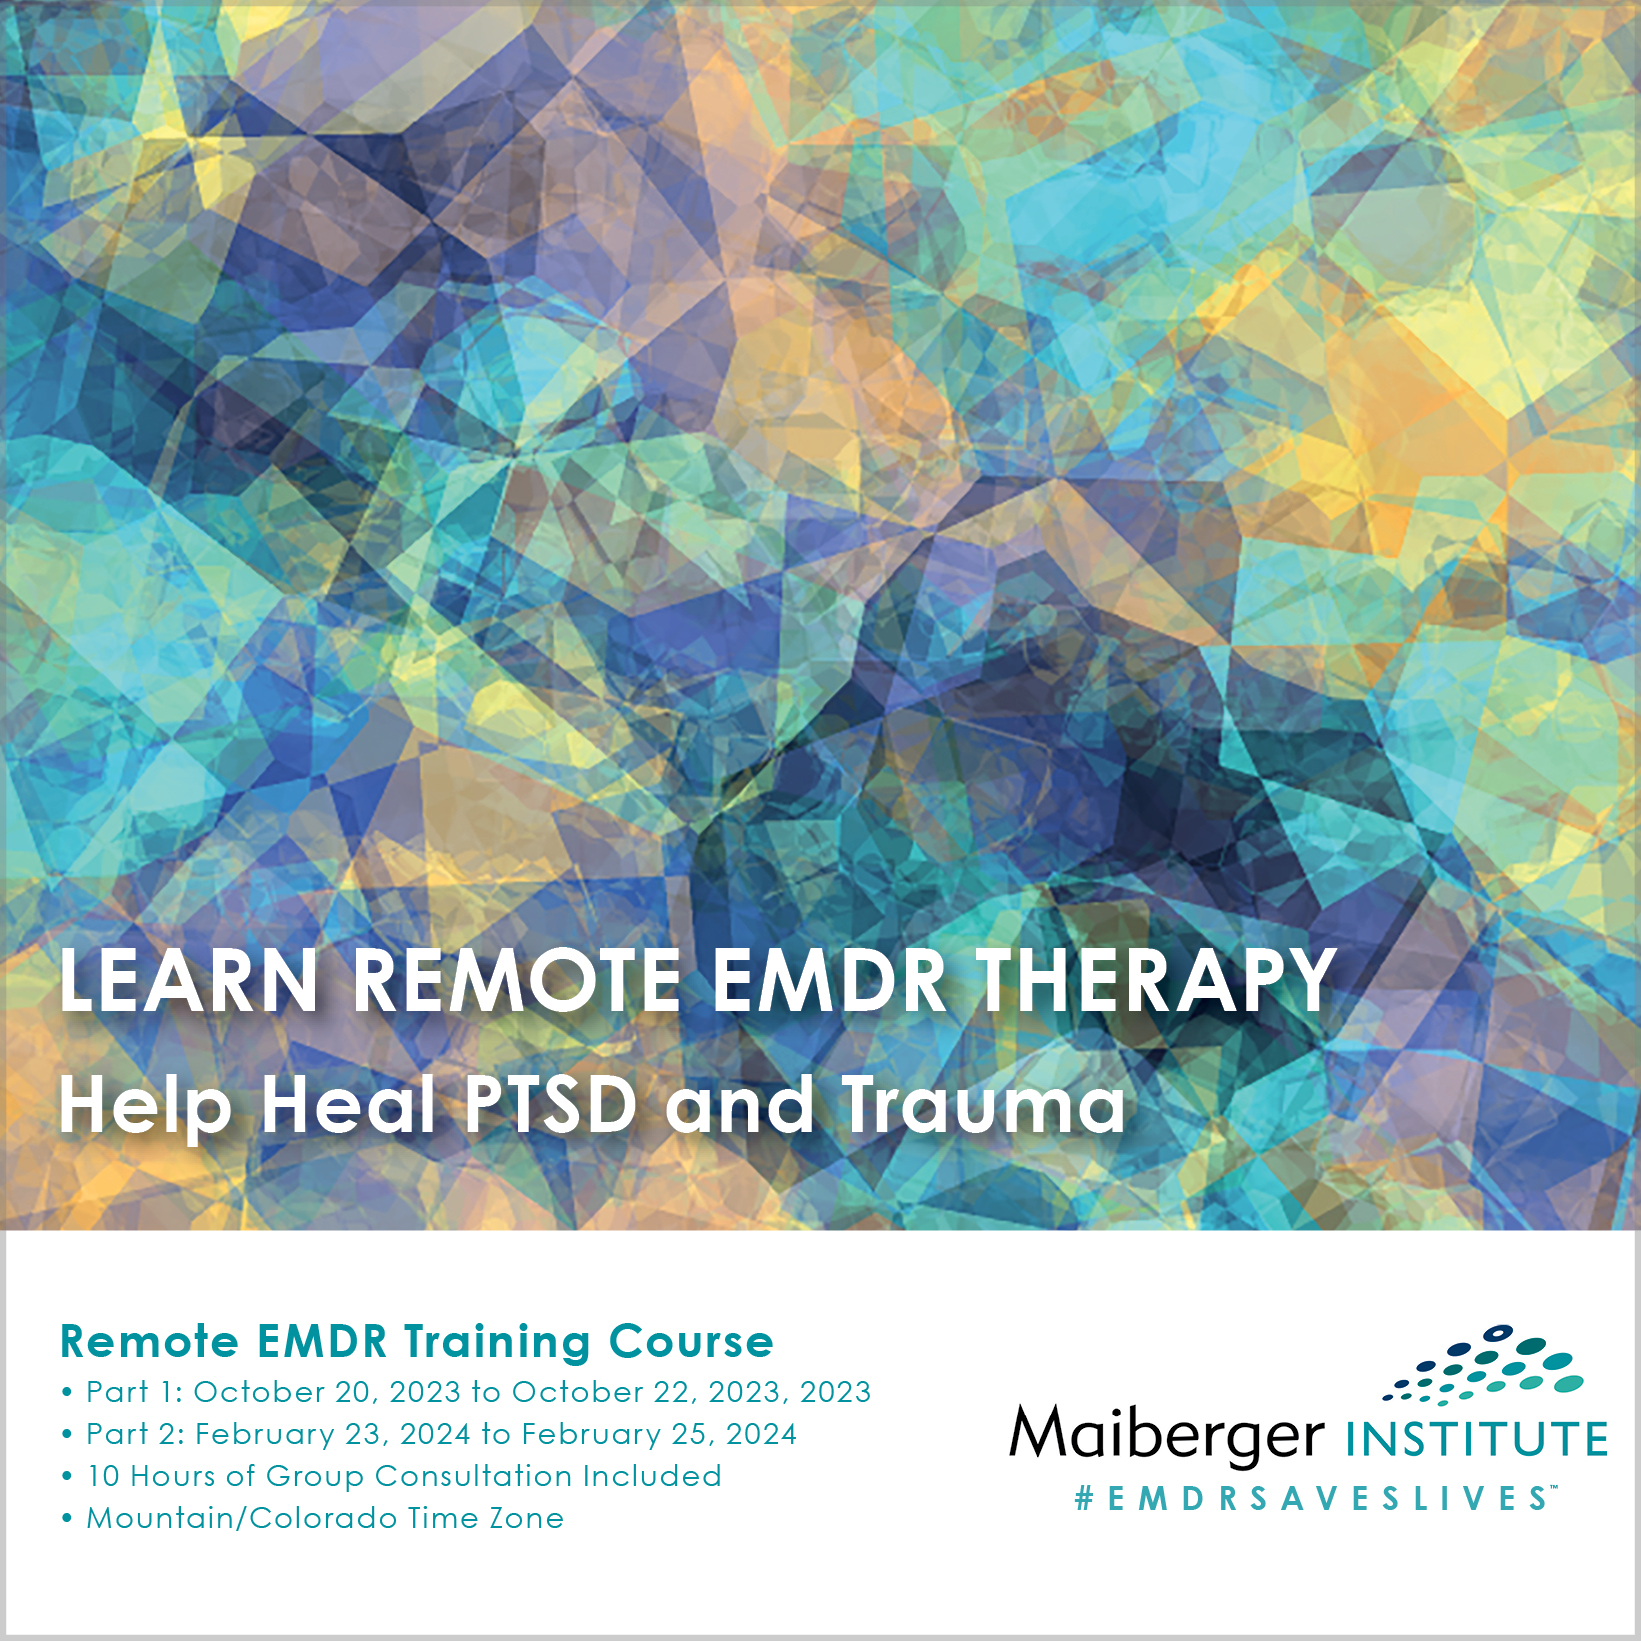 Complete Remote EMDR Training Course Part 1 October 20, 2023 to